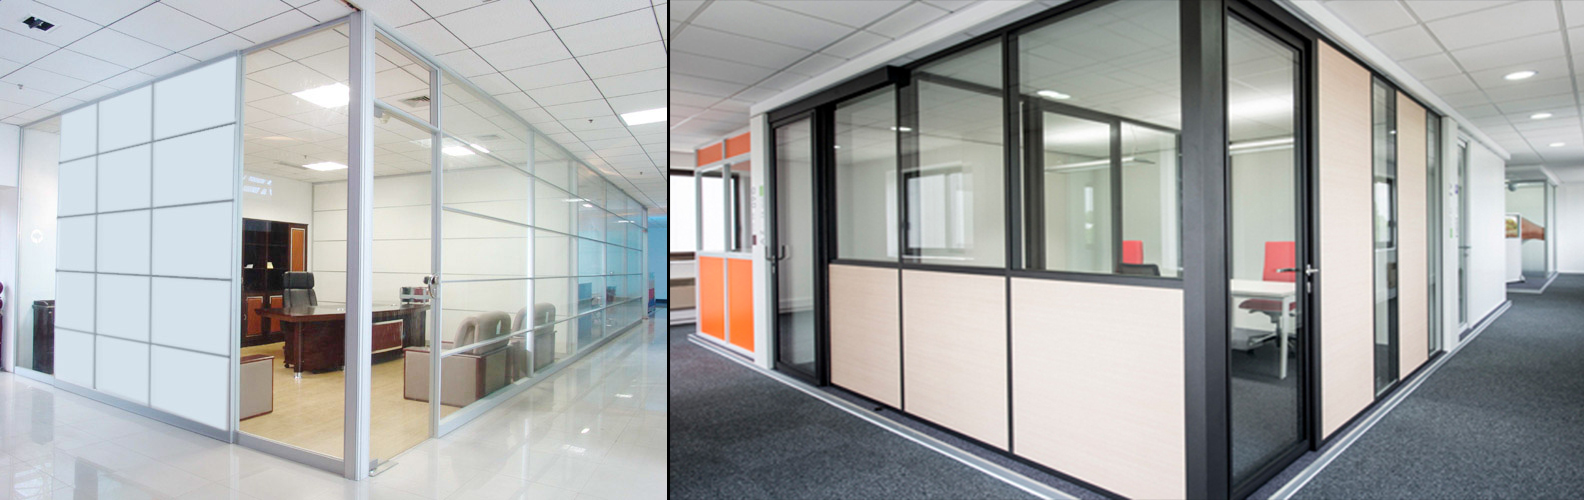 Aluminum Partition and Its Benefits | G Das Industries